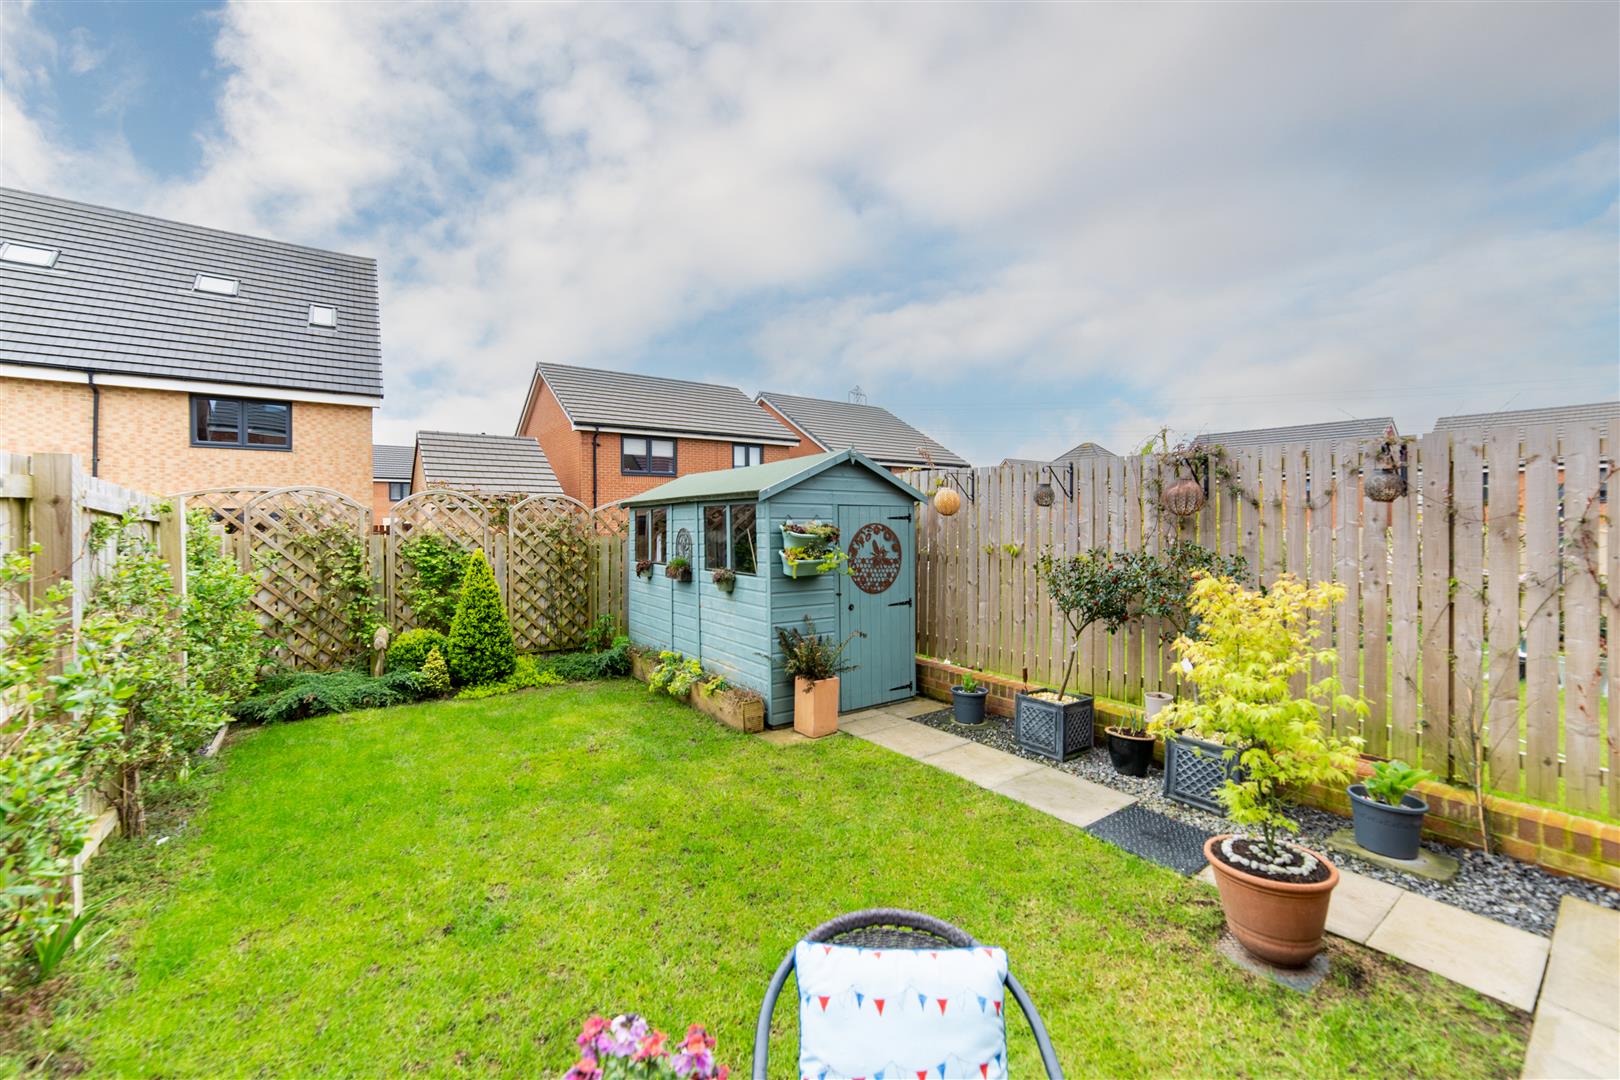 3 bed semi-detached house for sale in Speckledwood Way, Great Park 14